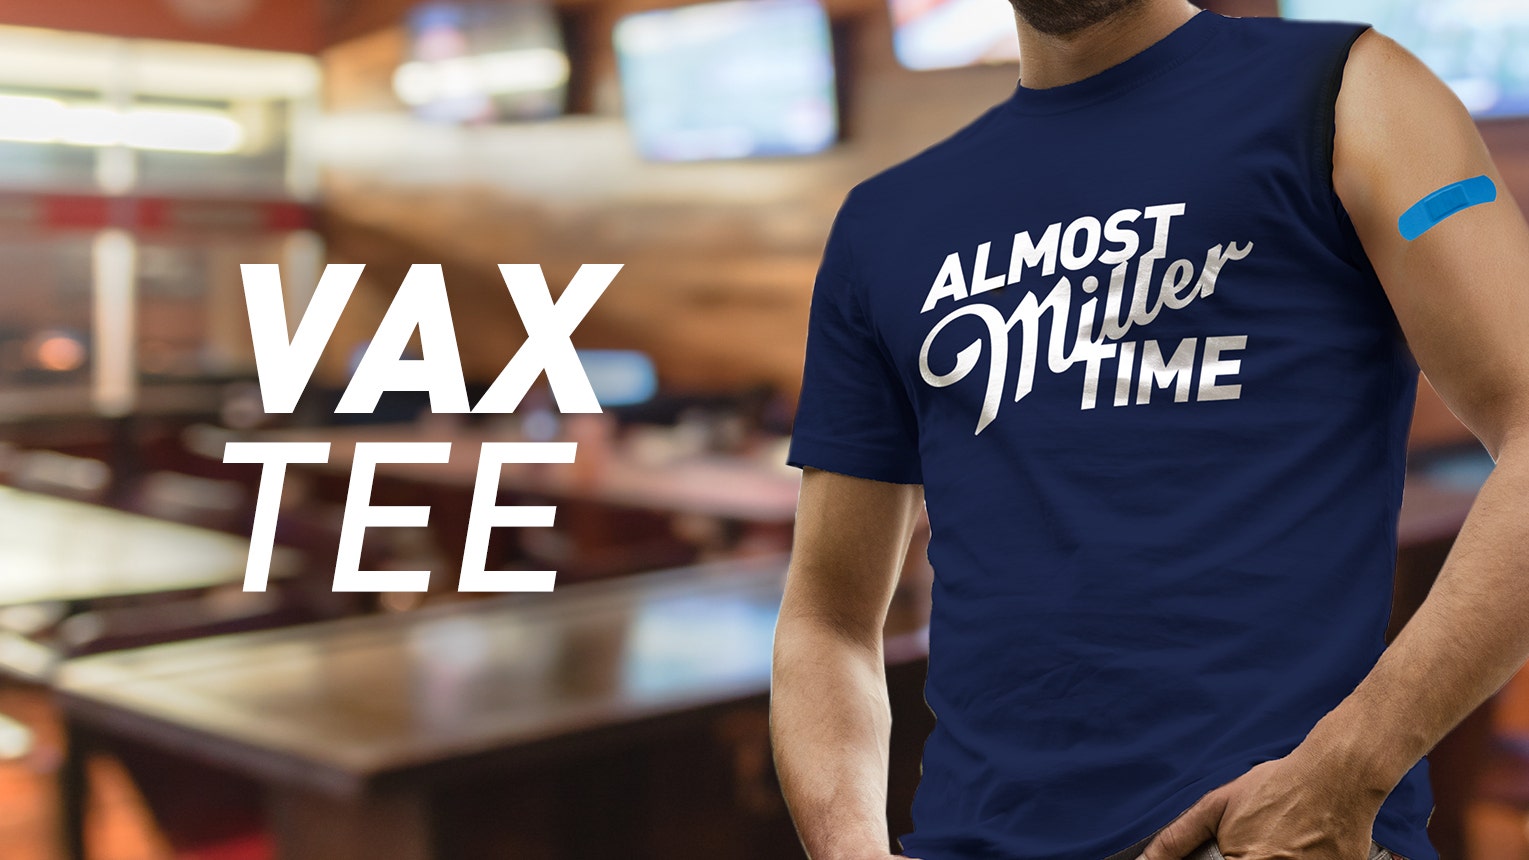 Miller Lite encourages COVID-19 vaccines with one-sleeved 'vax time' t-shirts